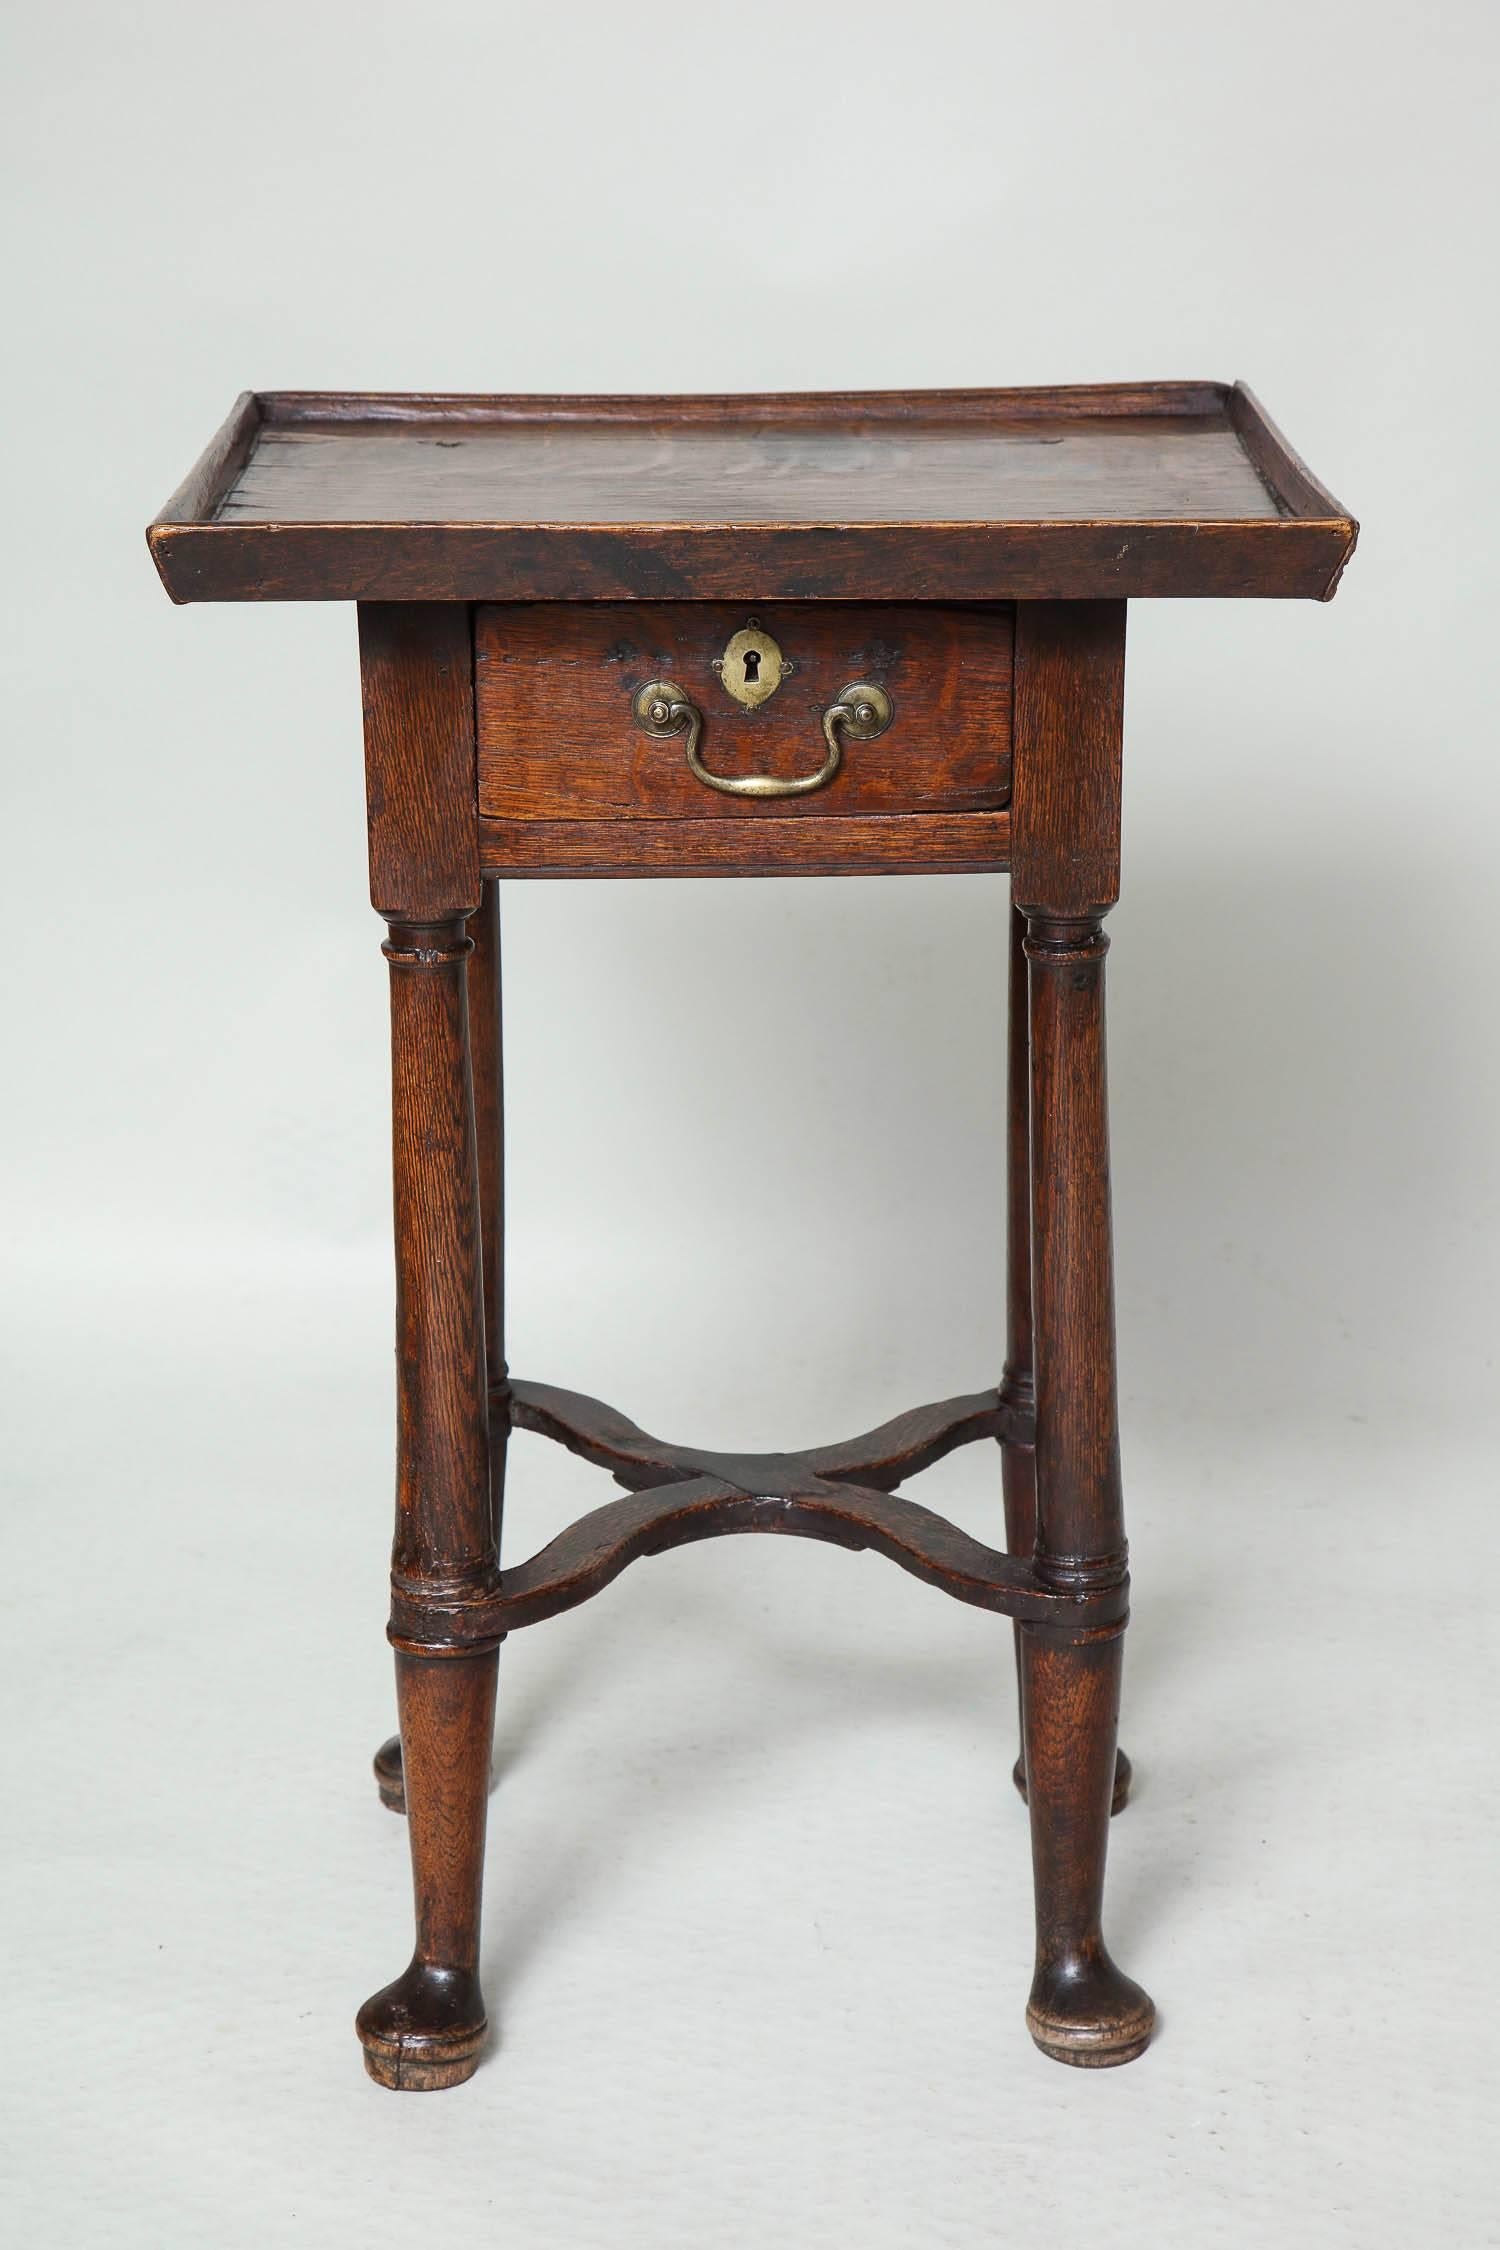 Charming and unusual English or Welsh oak side table with gallery edge over vividly grained top over single drawer retaining original hardware, over cannon barrel turned legs joined by archaic wavy X stretcher over turned pad feet.

This table